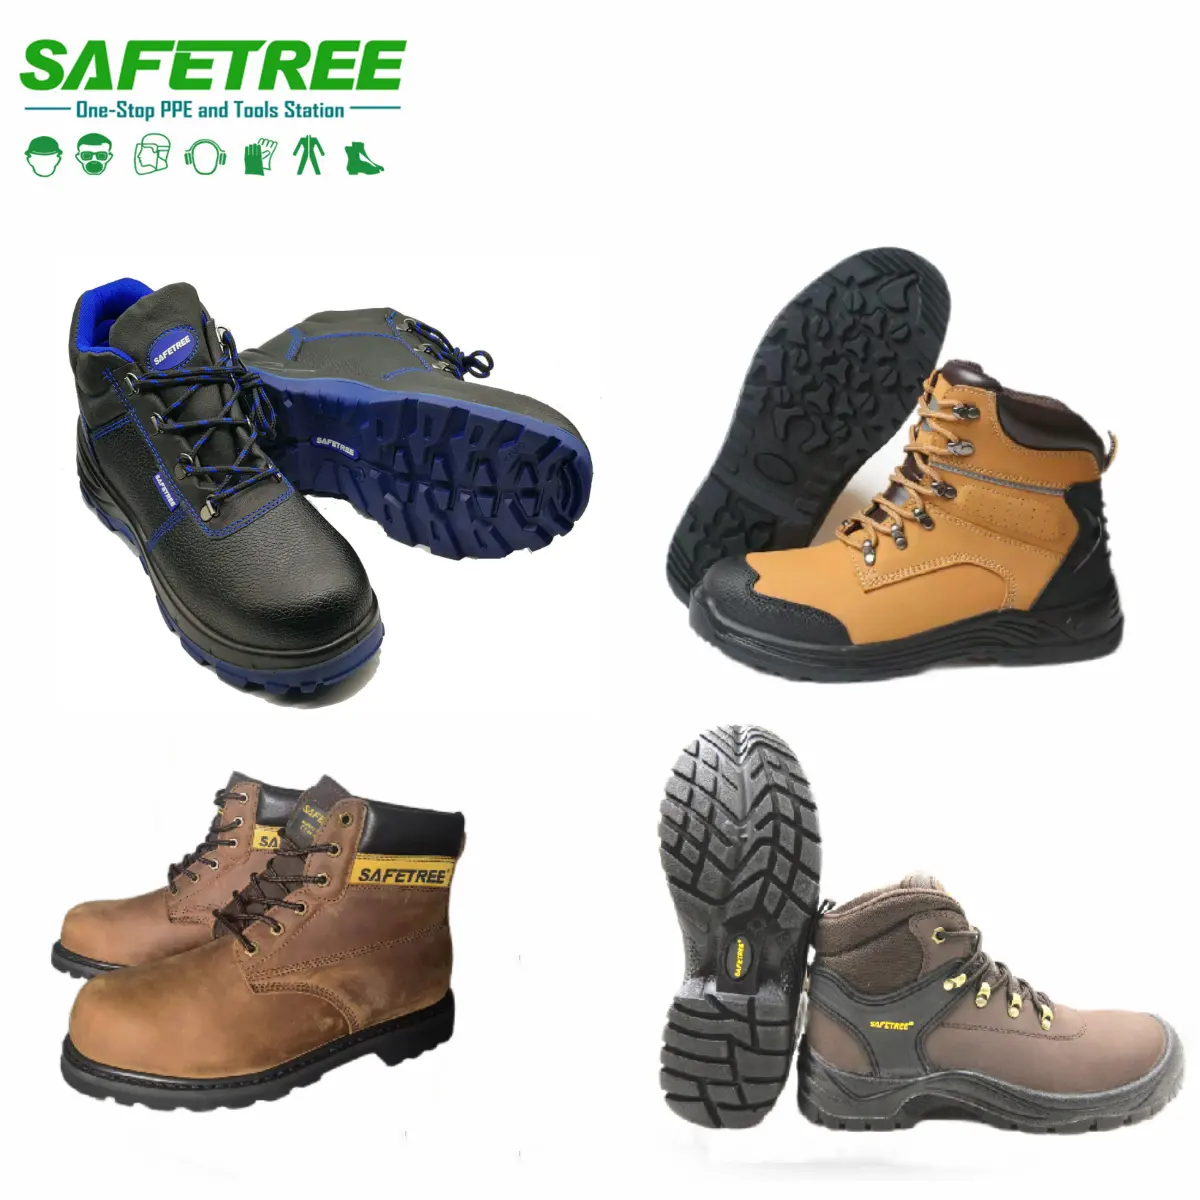 CE EN20345 Standard Certified Industrial Cow Leather S1P & S3 Shoes Safety Boots Puncture Resistant Footwear for Foot Protection